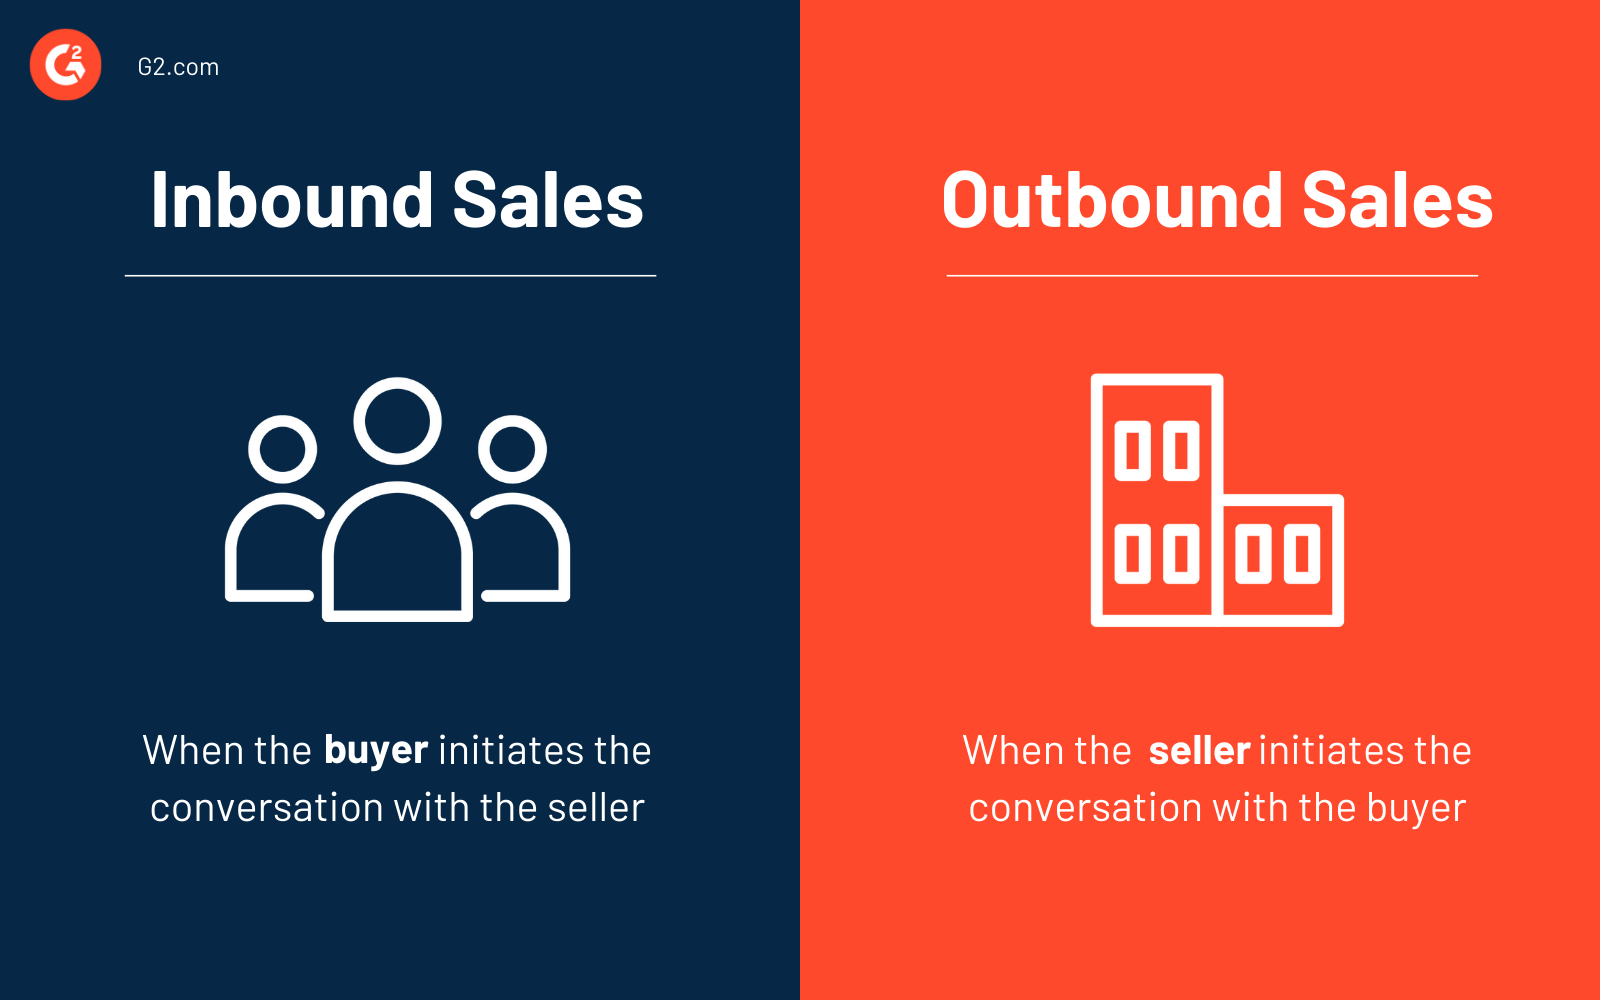 What Every Rep Needs to Know About Outbound Sales